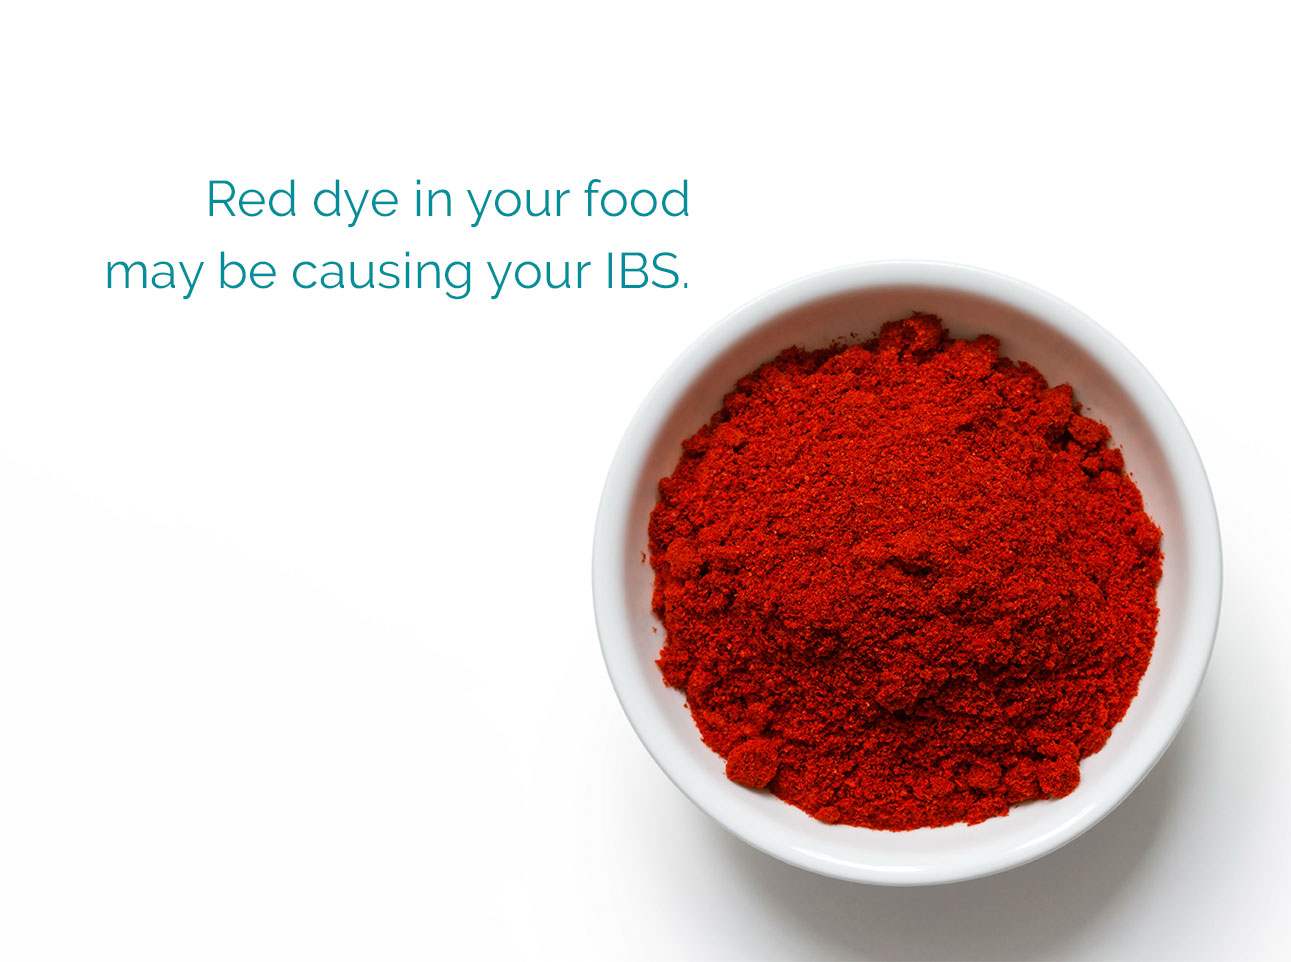 Red Dye in Food and IBS